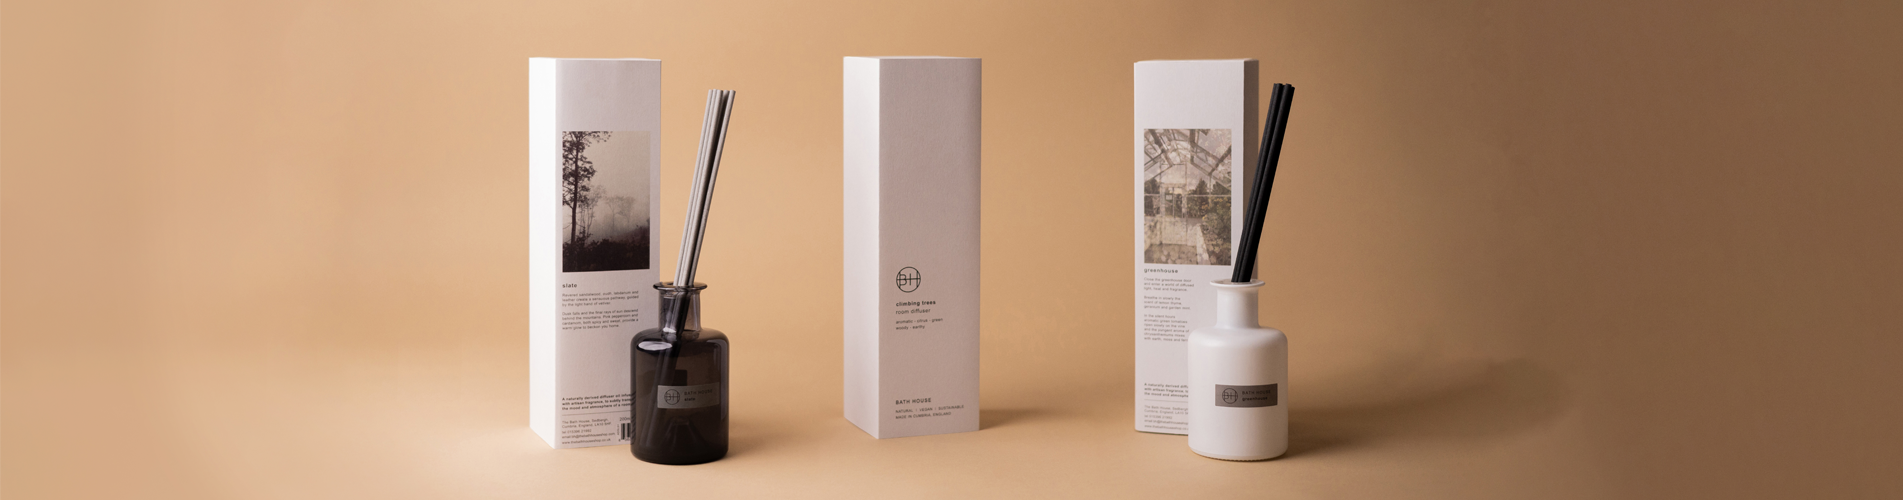 Banner Image Of The Room Diffusers Product Category